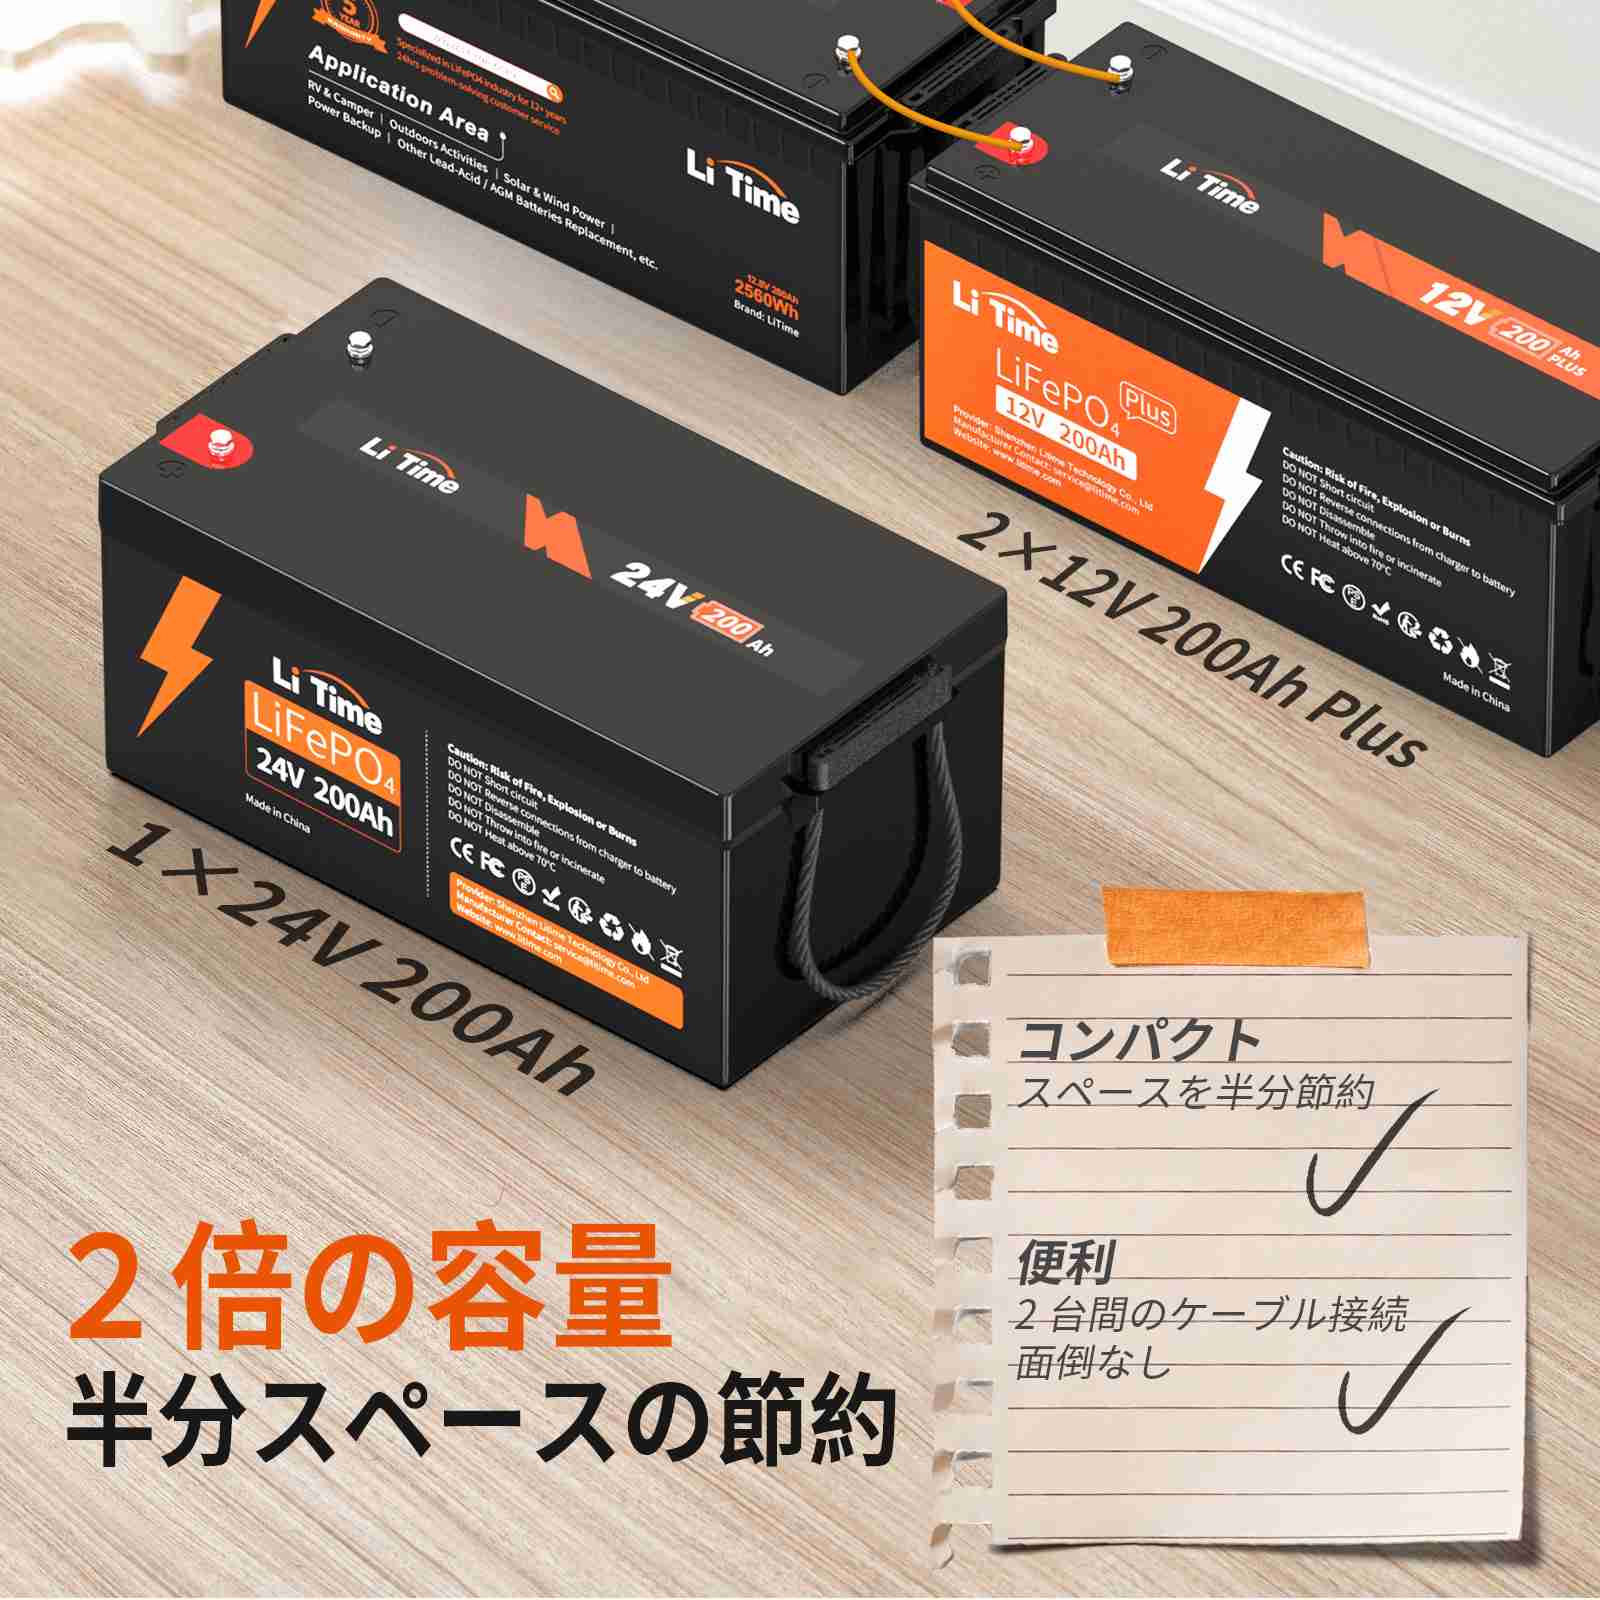 LiTime「Ampere Time 」 24V200Ah リン酸鉄リチウムイオンバッテリー 5120Wh LiFePO4 バッテリー ampere time